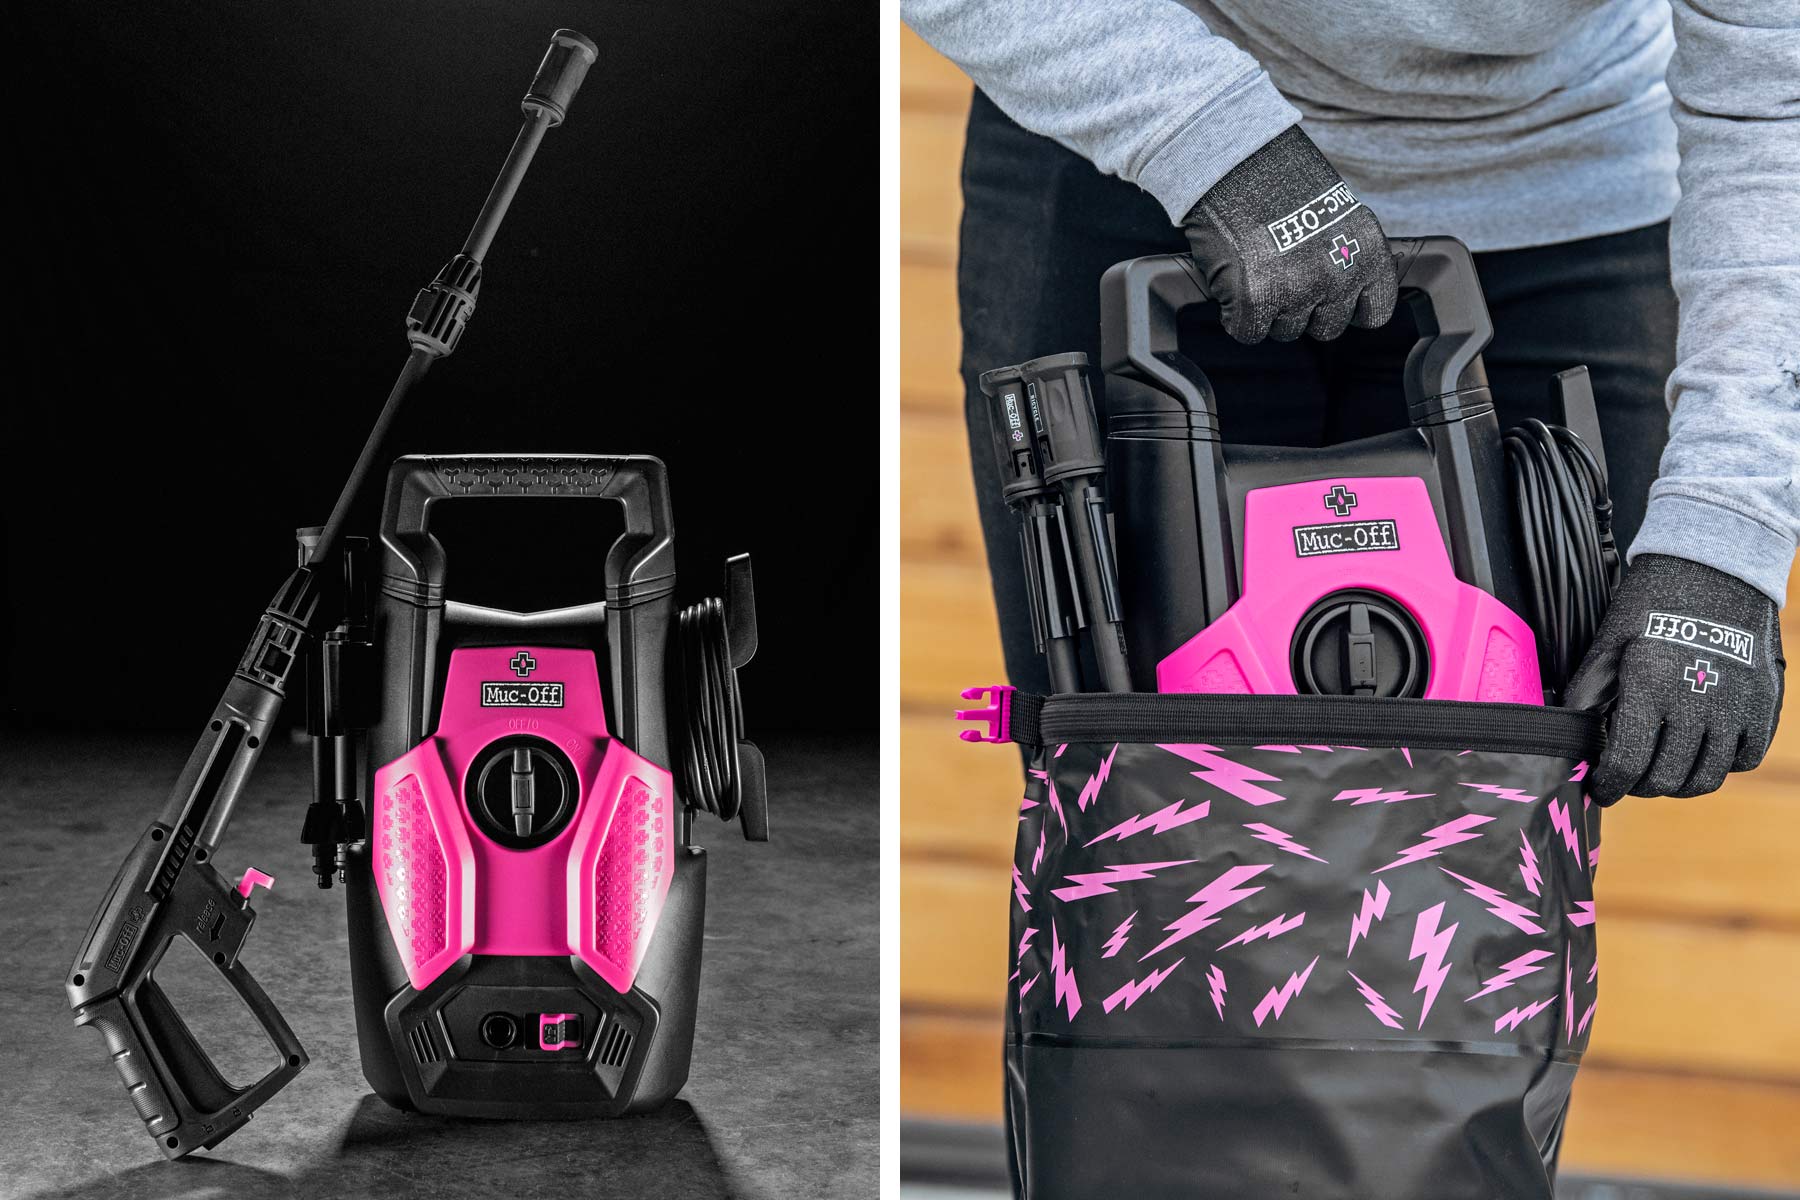 Muc-Off Pressure Washer, bike-specific deep clean road gravel cyclocross mountain bike cleaner